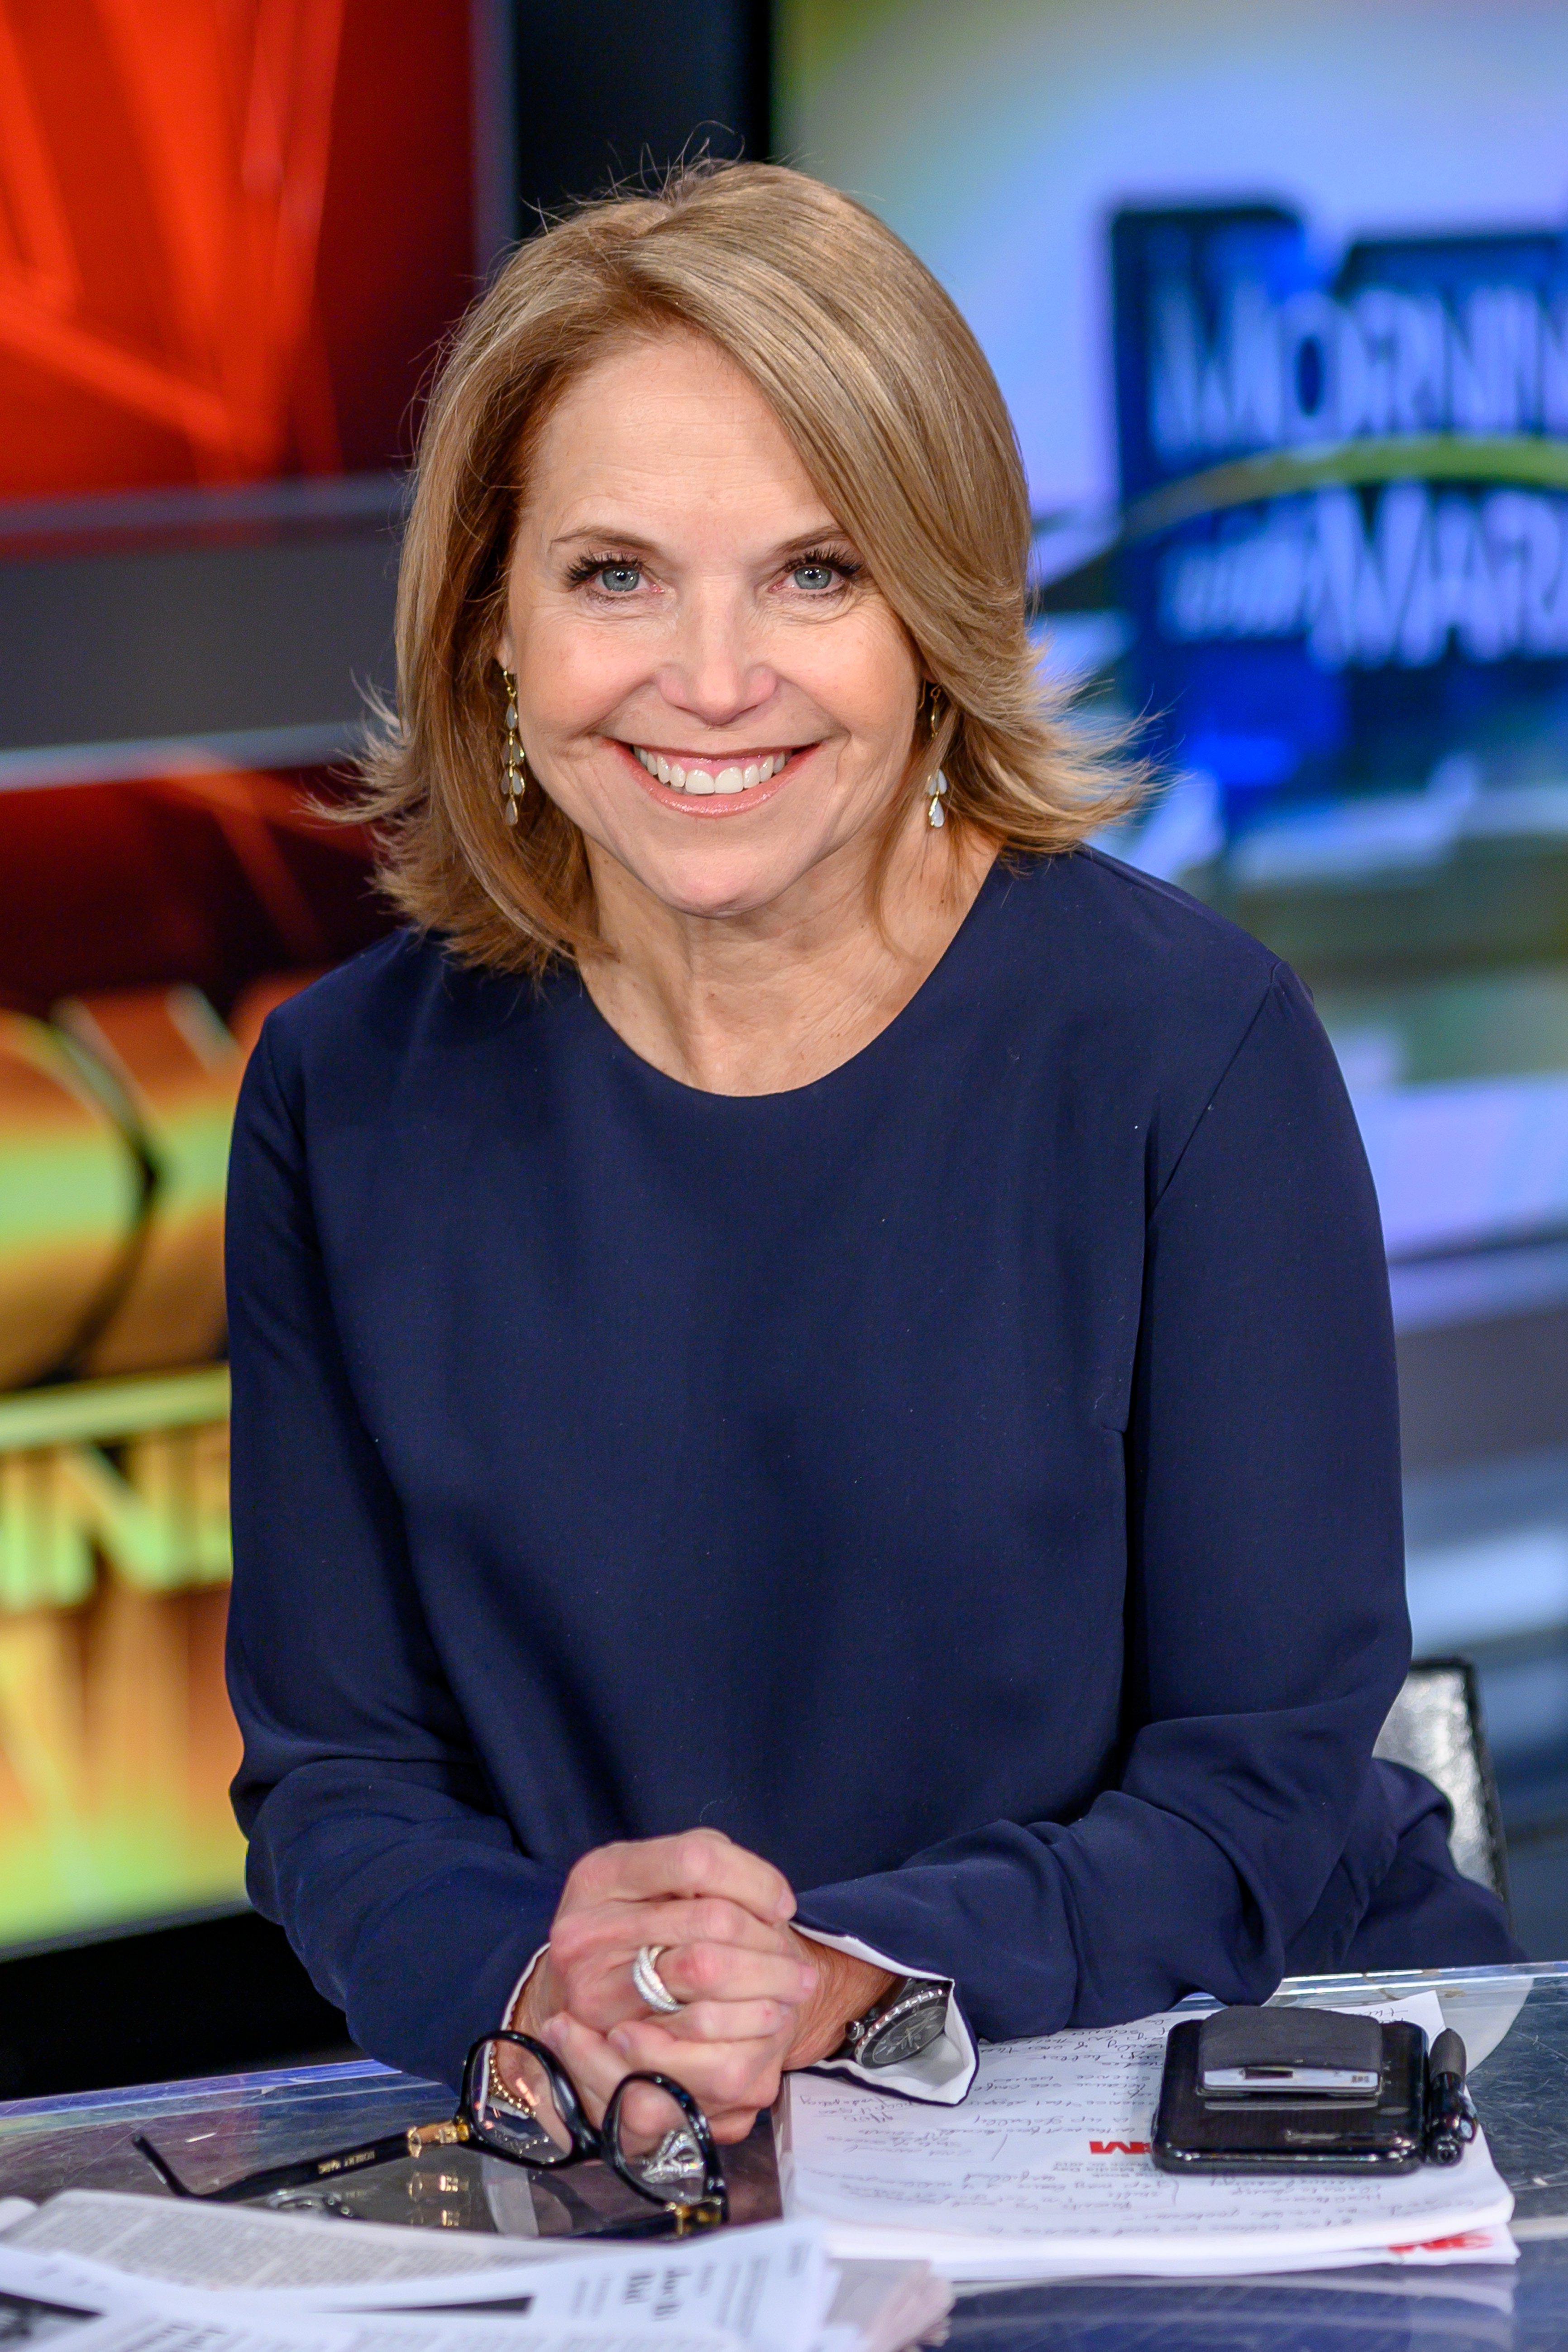 Katie Couric in at Forbes Business Network Studios in New York 2019. | Source: Getty Images